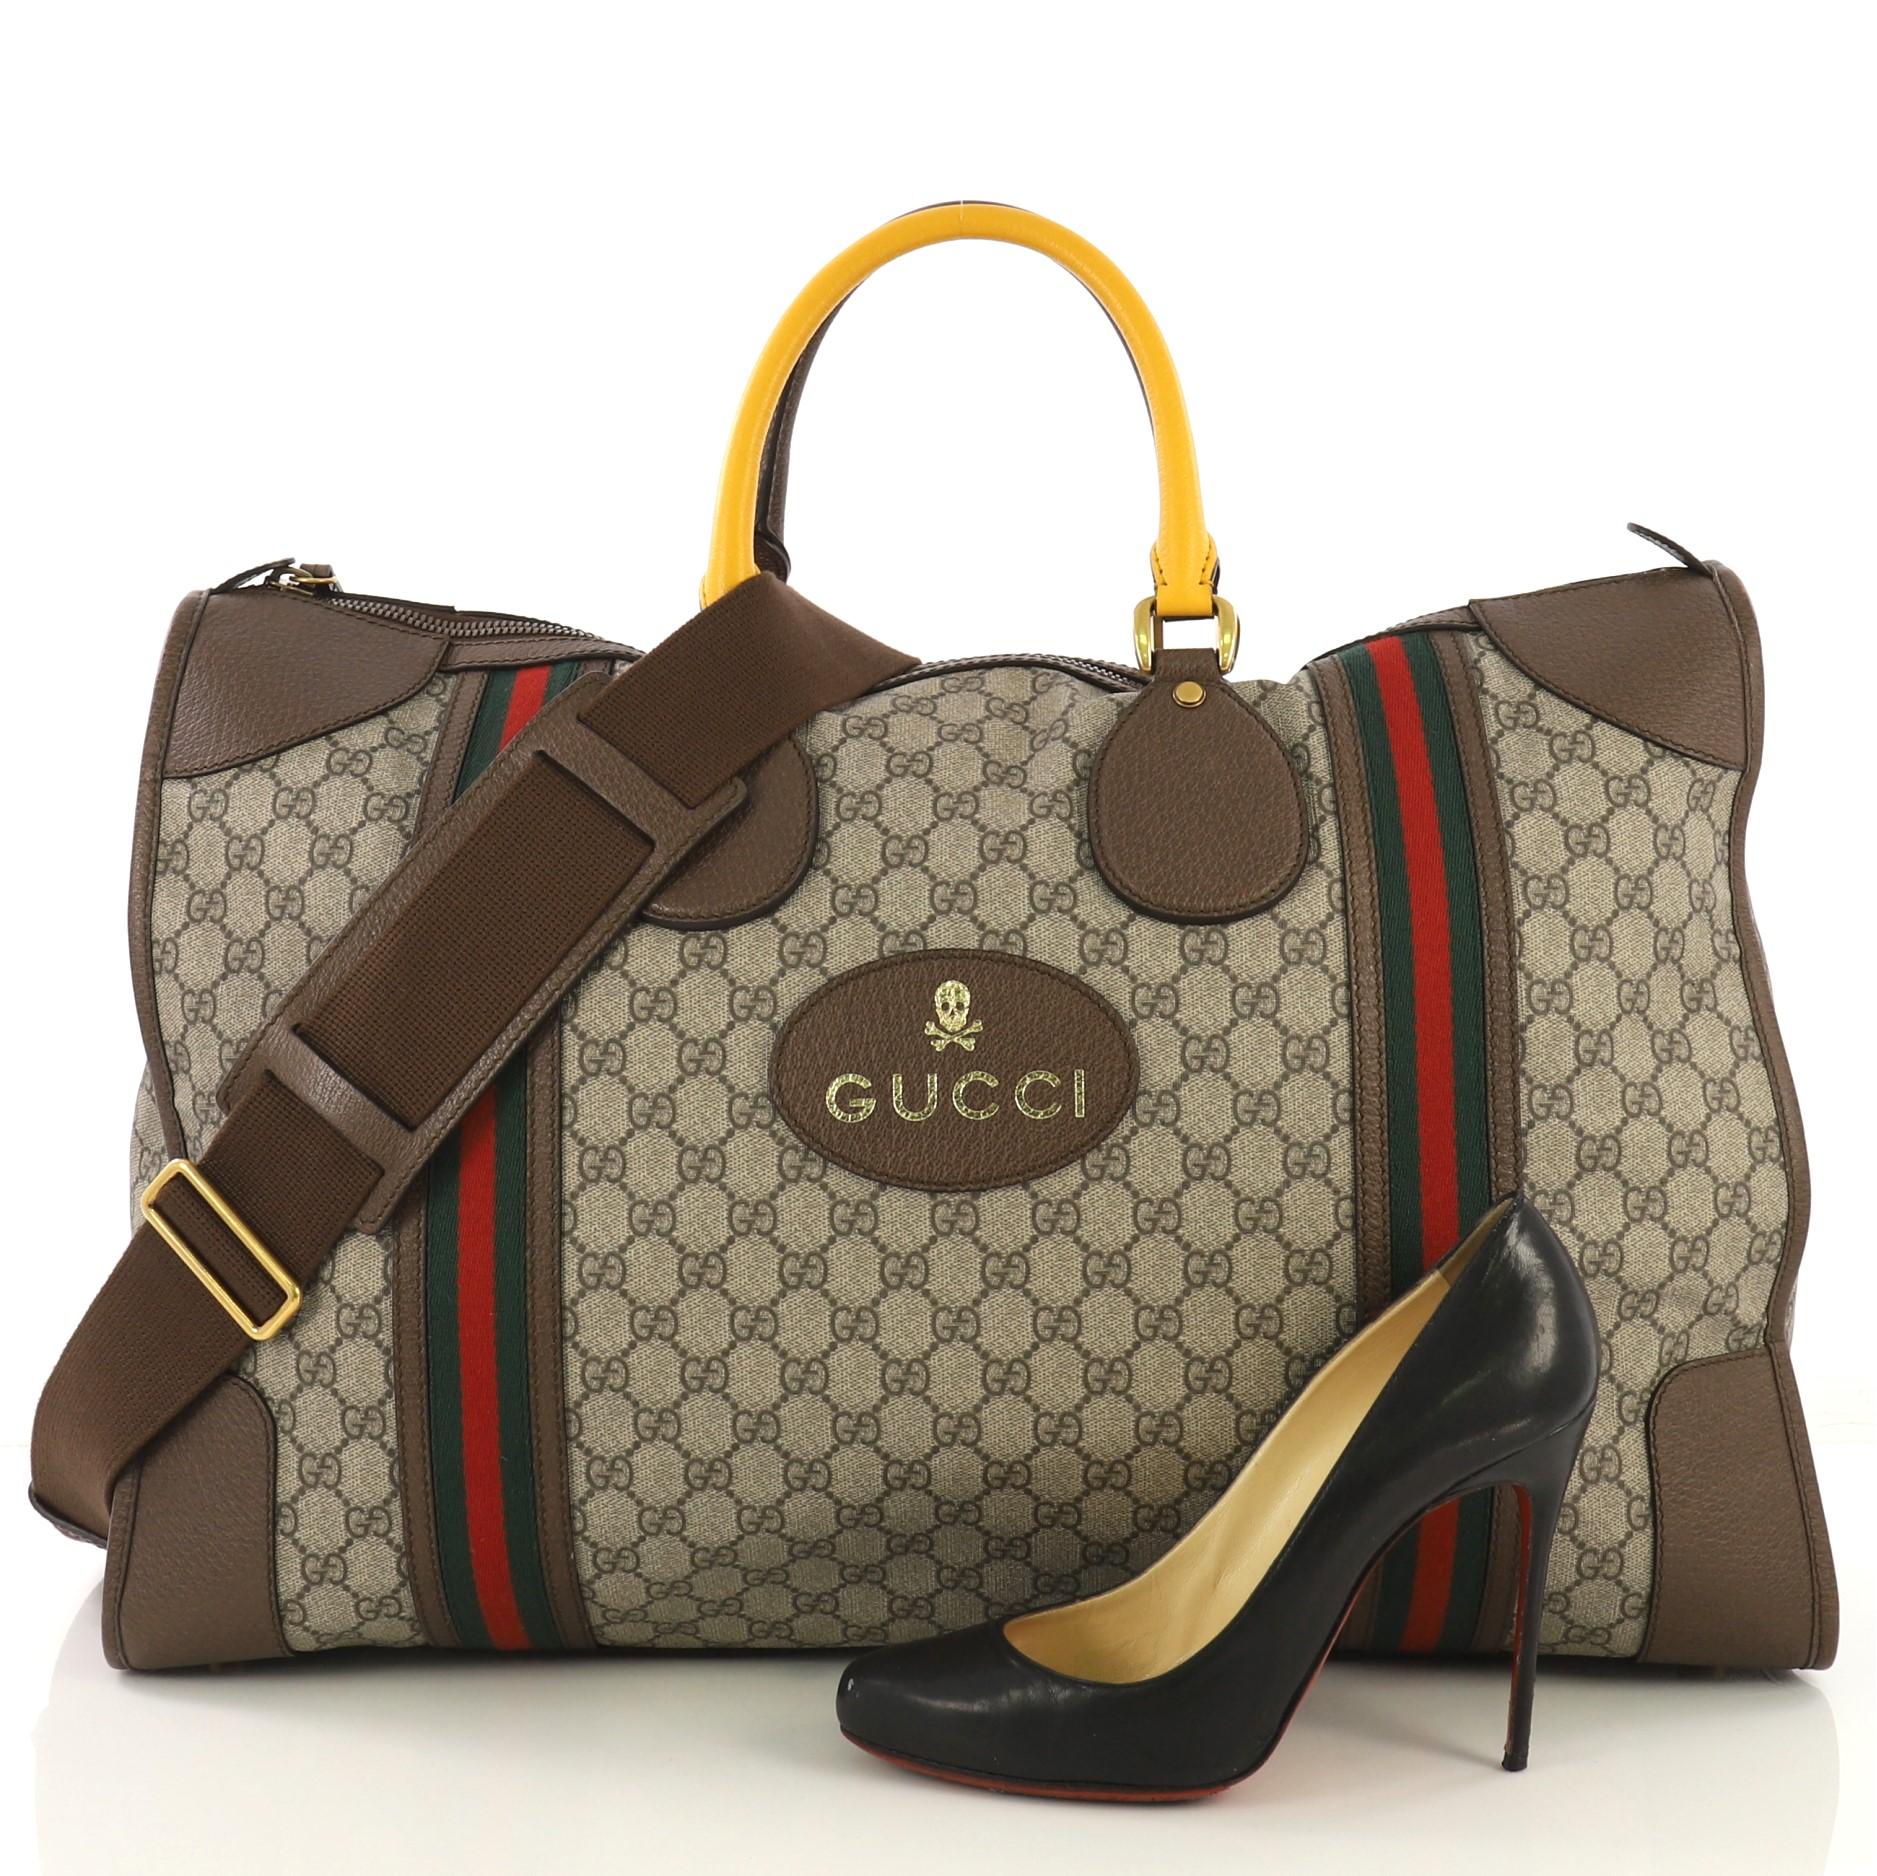 This Gucci Web Convertible Duffle Bag GG Coated Canvas Large, crafted from beige GG coated canvas, features dual rolled handles, web detailing and aged gold-tone hardware. Its zip closure opens to a beige fabric interior with zip and slip pockets.